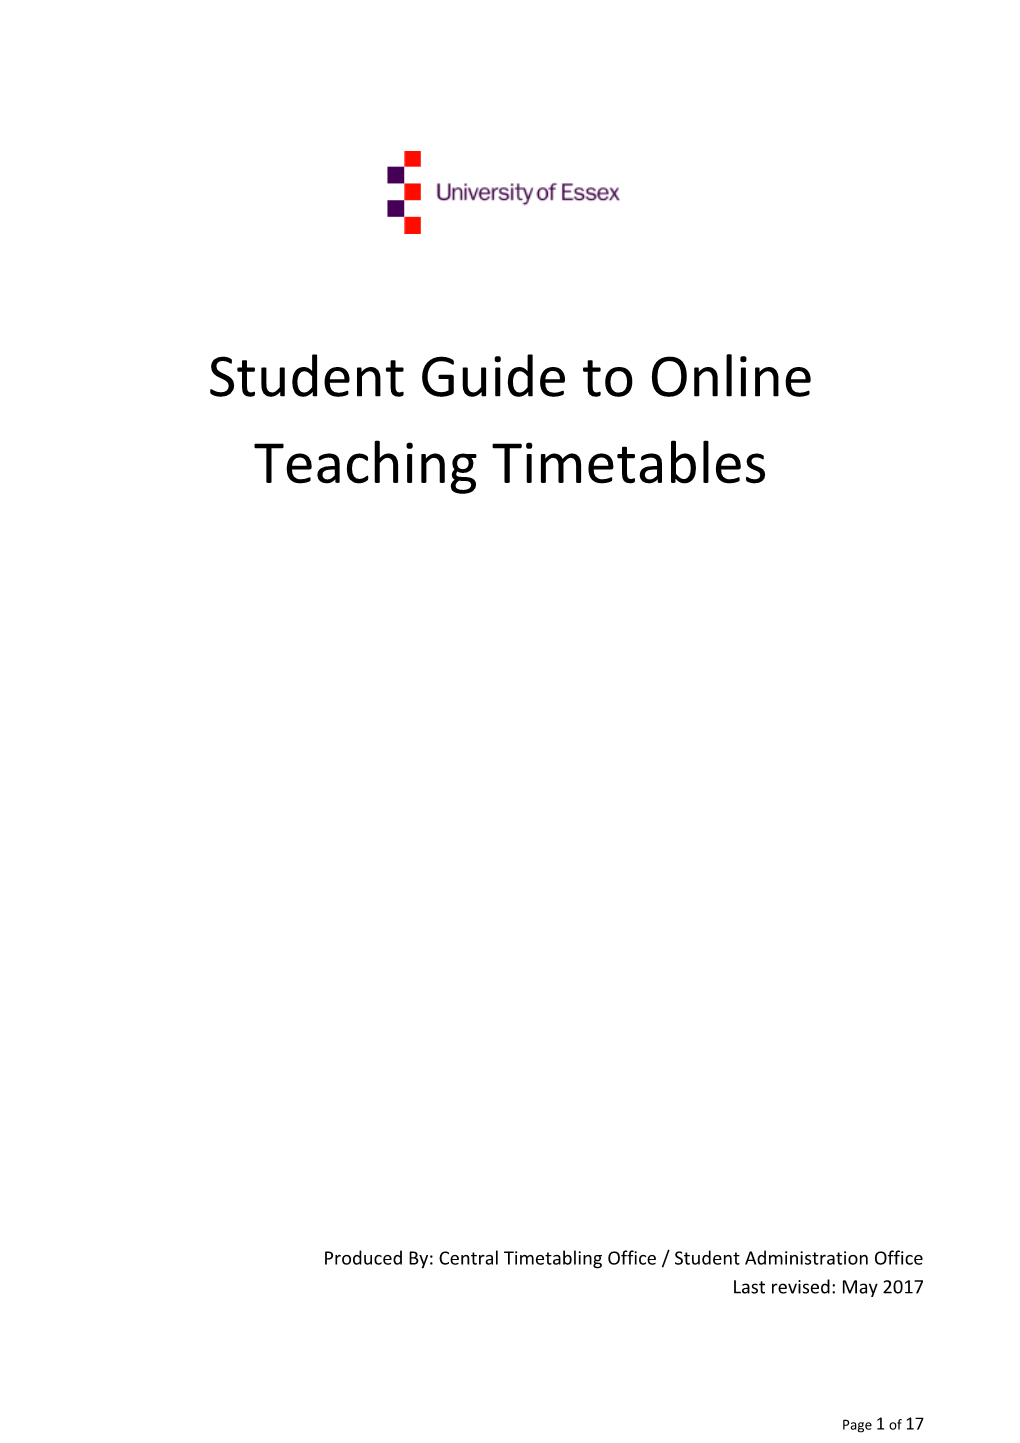 Student Guide to Online Teaching Timetables